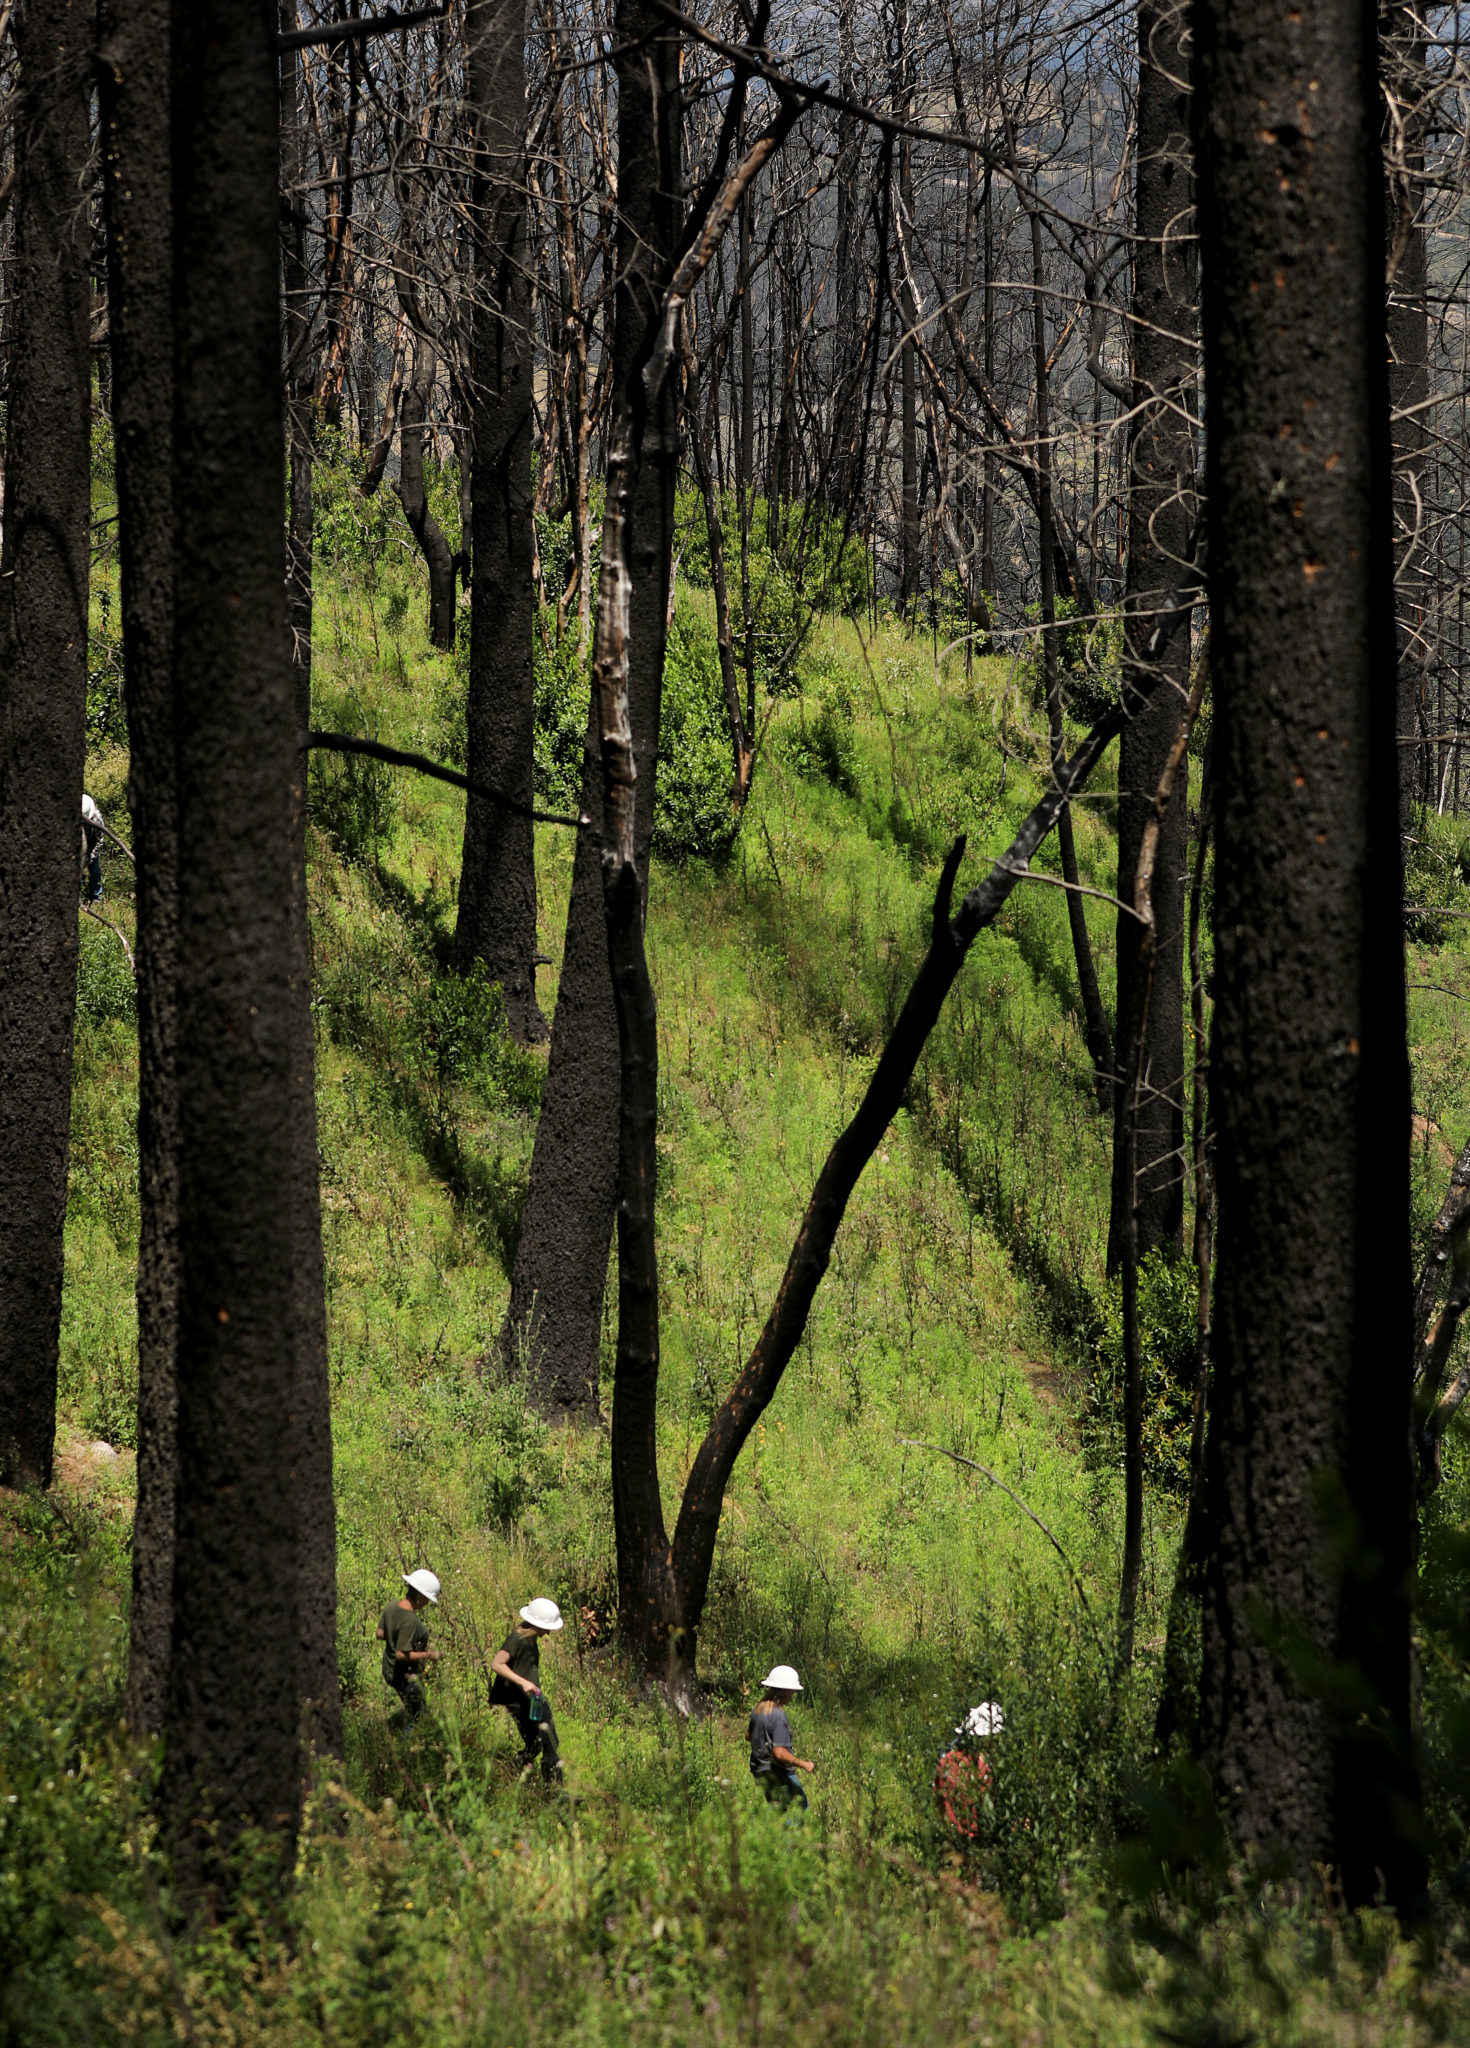 Large charred fir and oak trees tower above a group of Pepperwood Preserve employees as they hike a section of the forest that was severely damaged by the Tubbs fire, Tuesday, May 28, 2019. (Kent Porter / Press Democrat) 2019